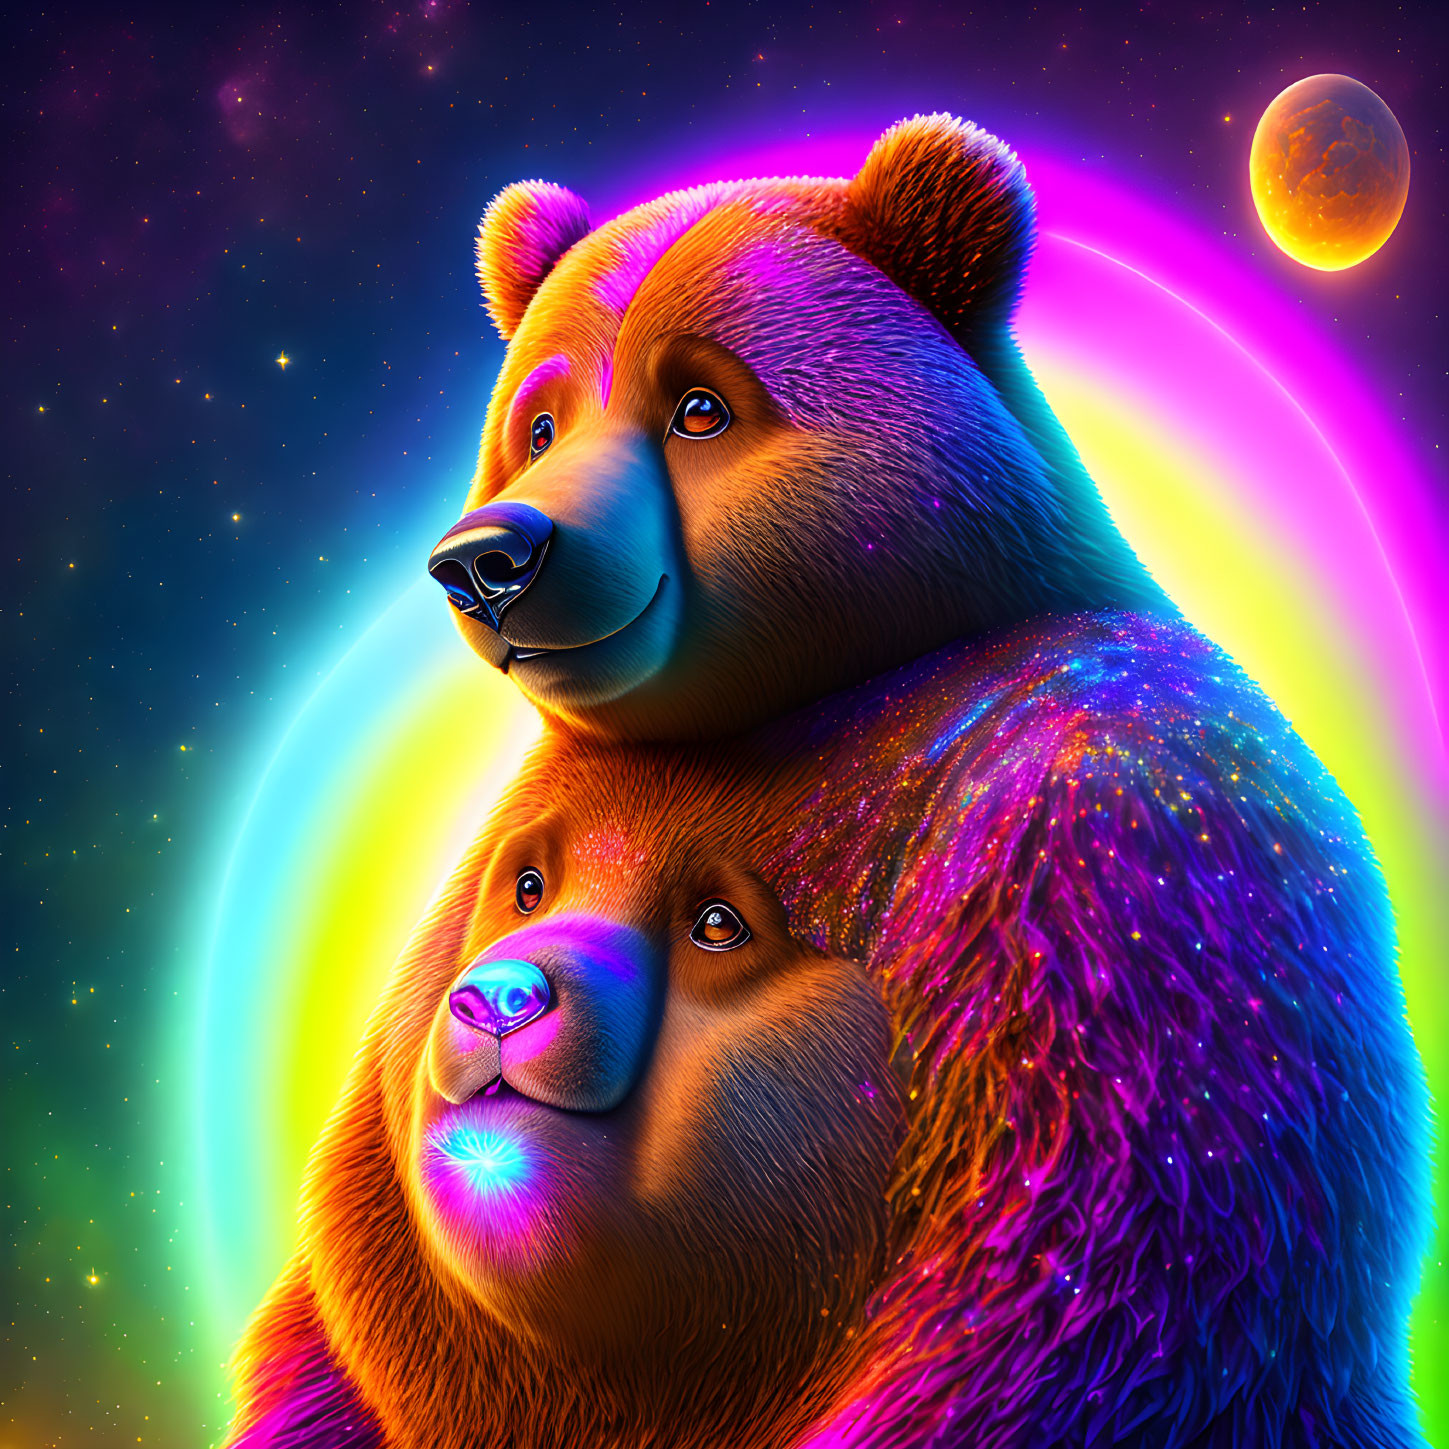 Colorful Bears in Cosmic Scene with Stars and Rainbow